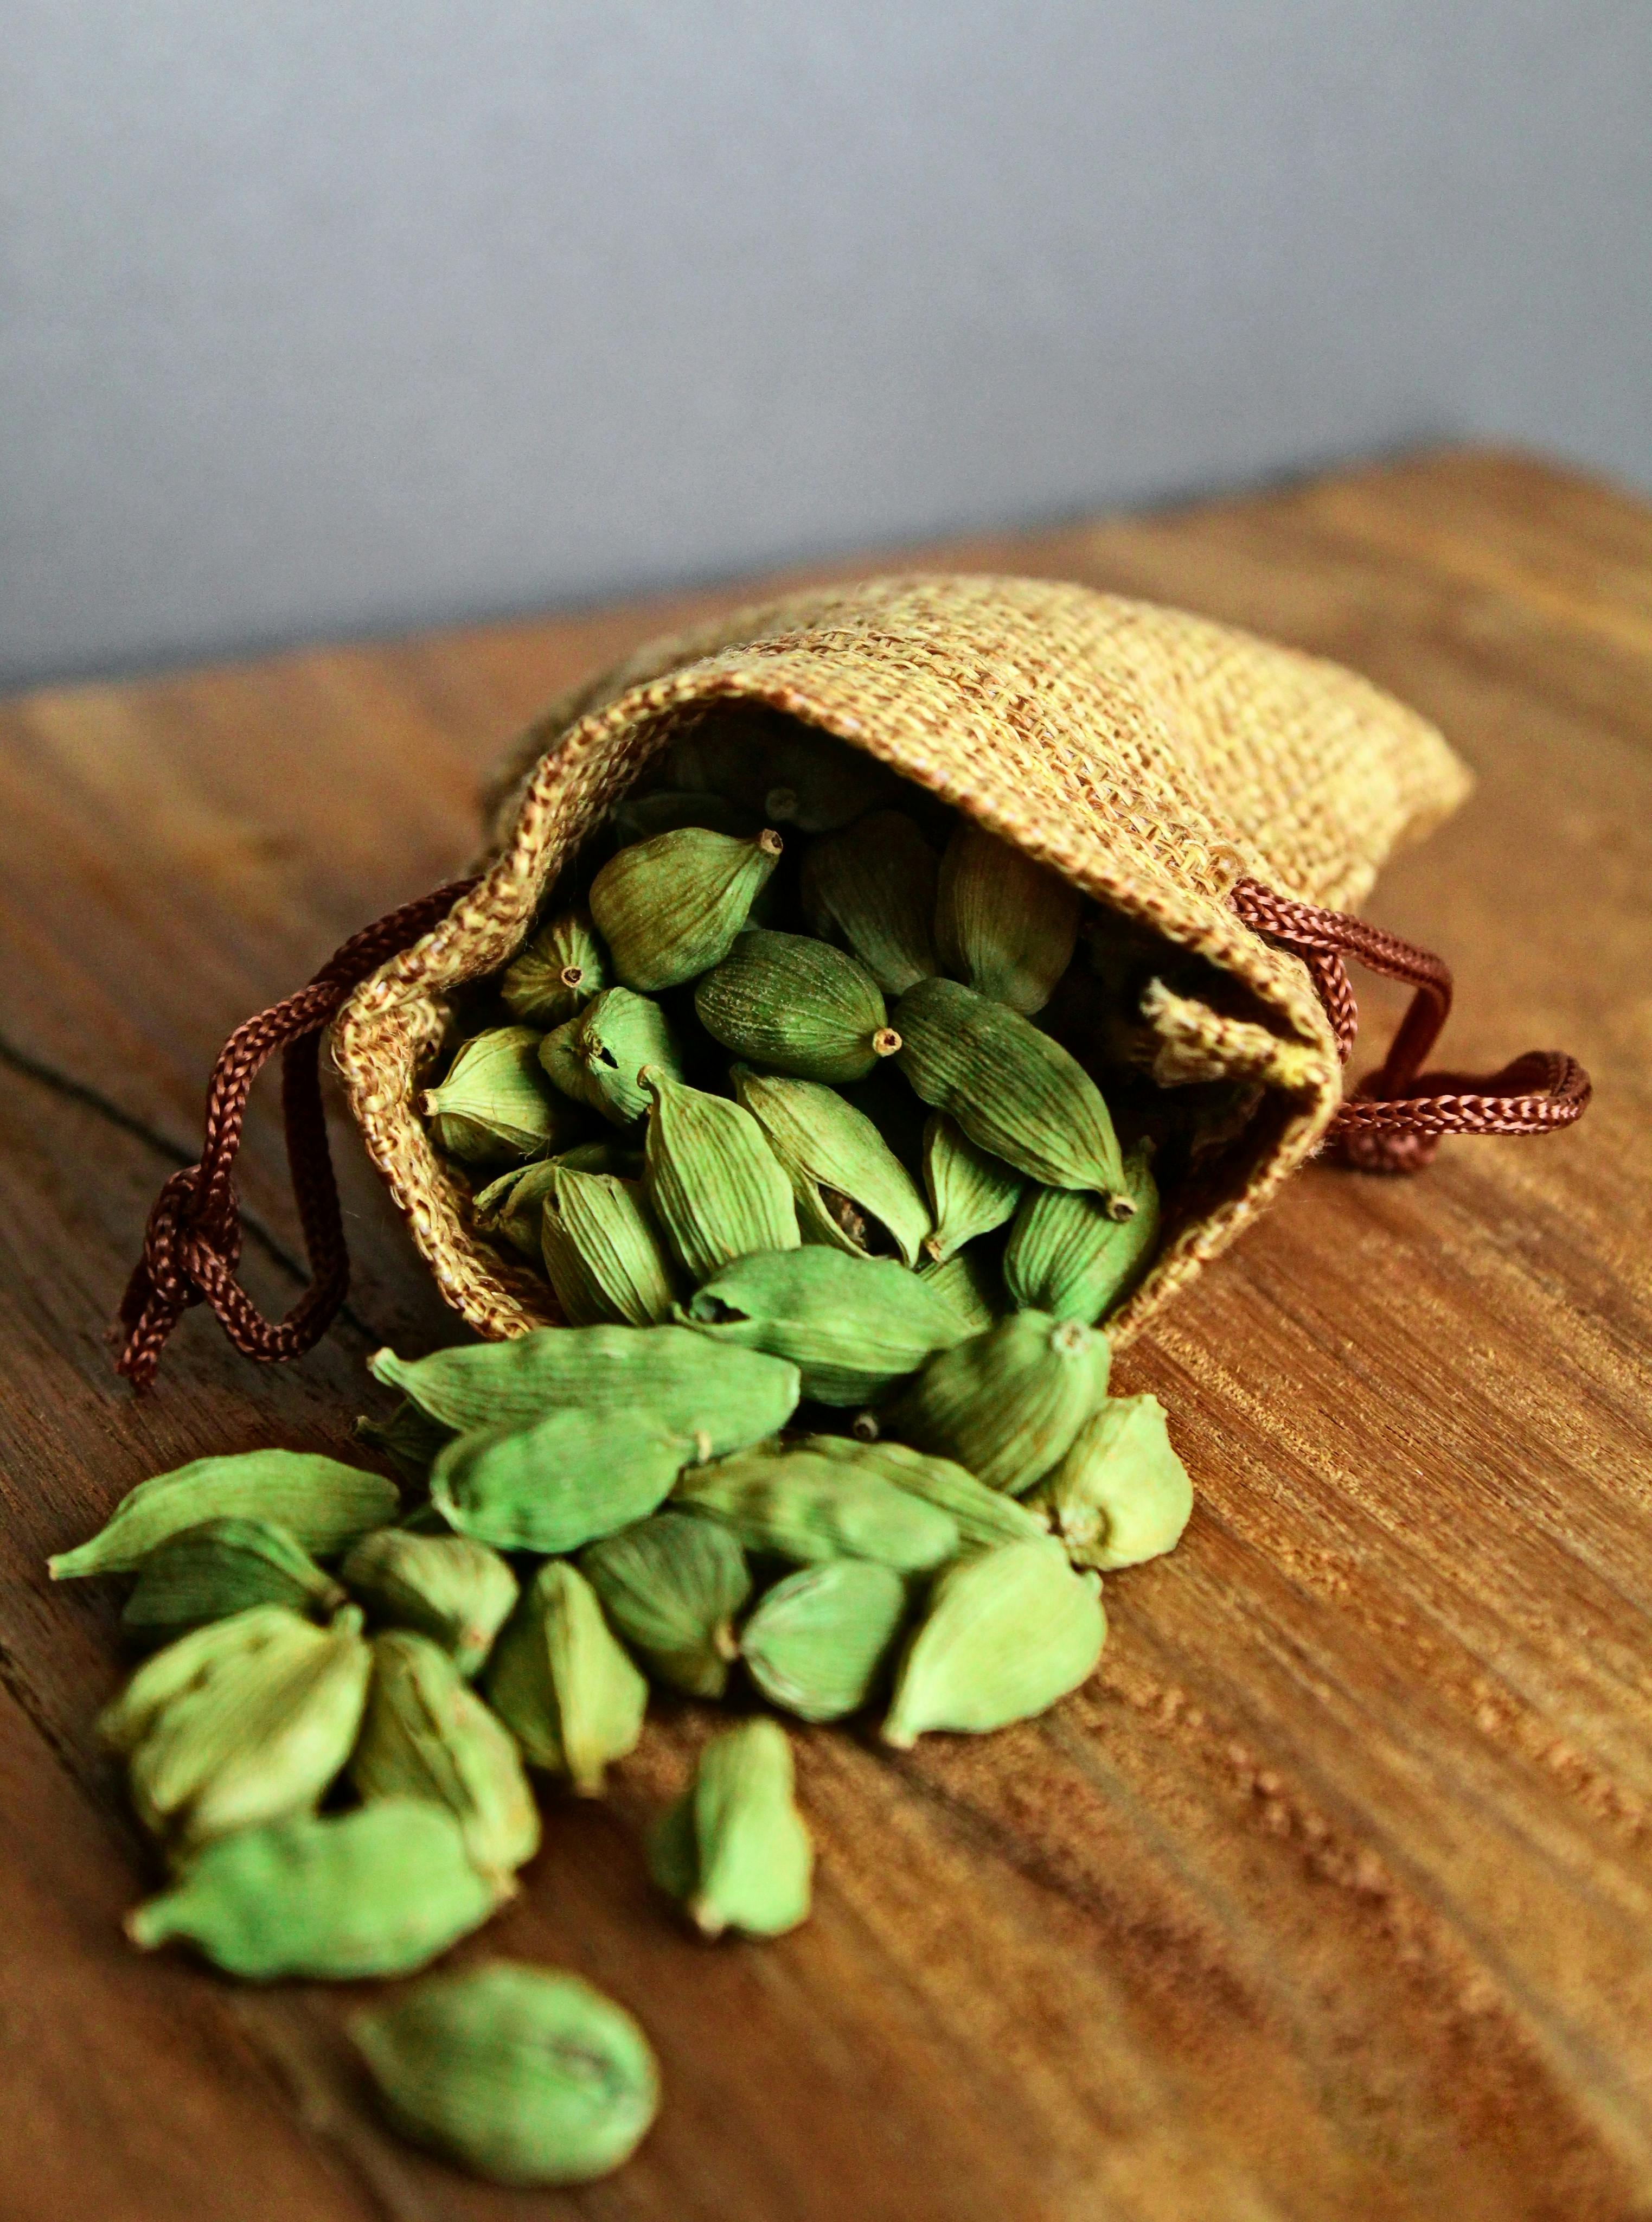 112603 Cardamom Images Stock Photos  Vectors  Shutterstock